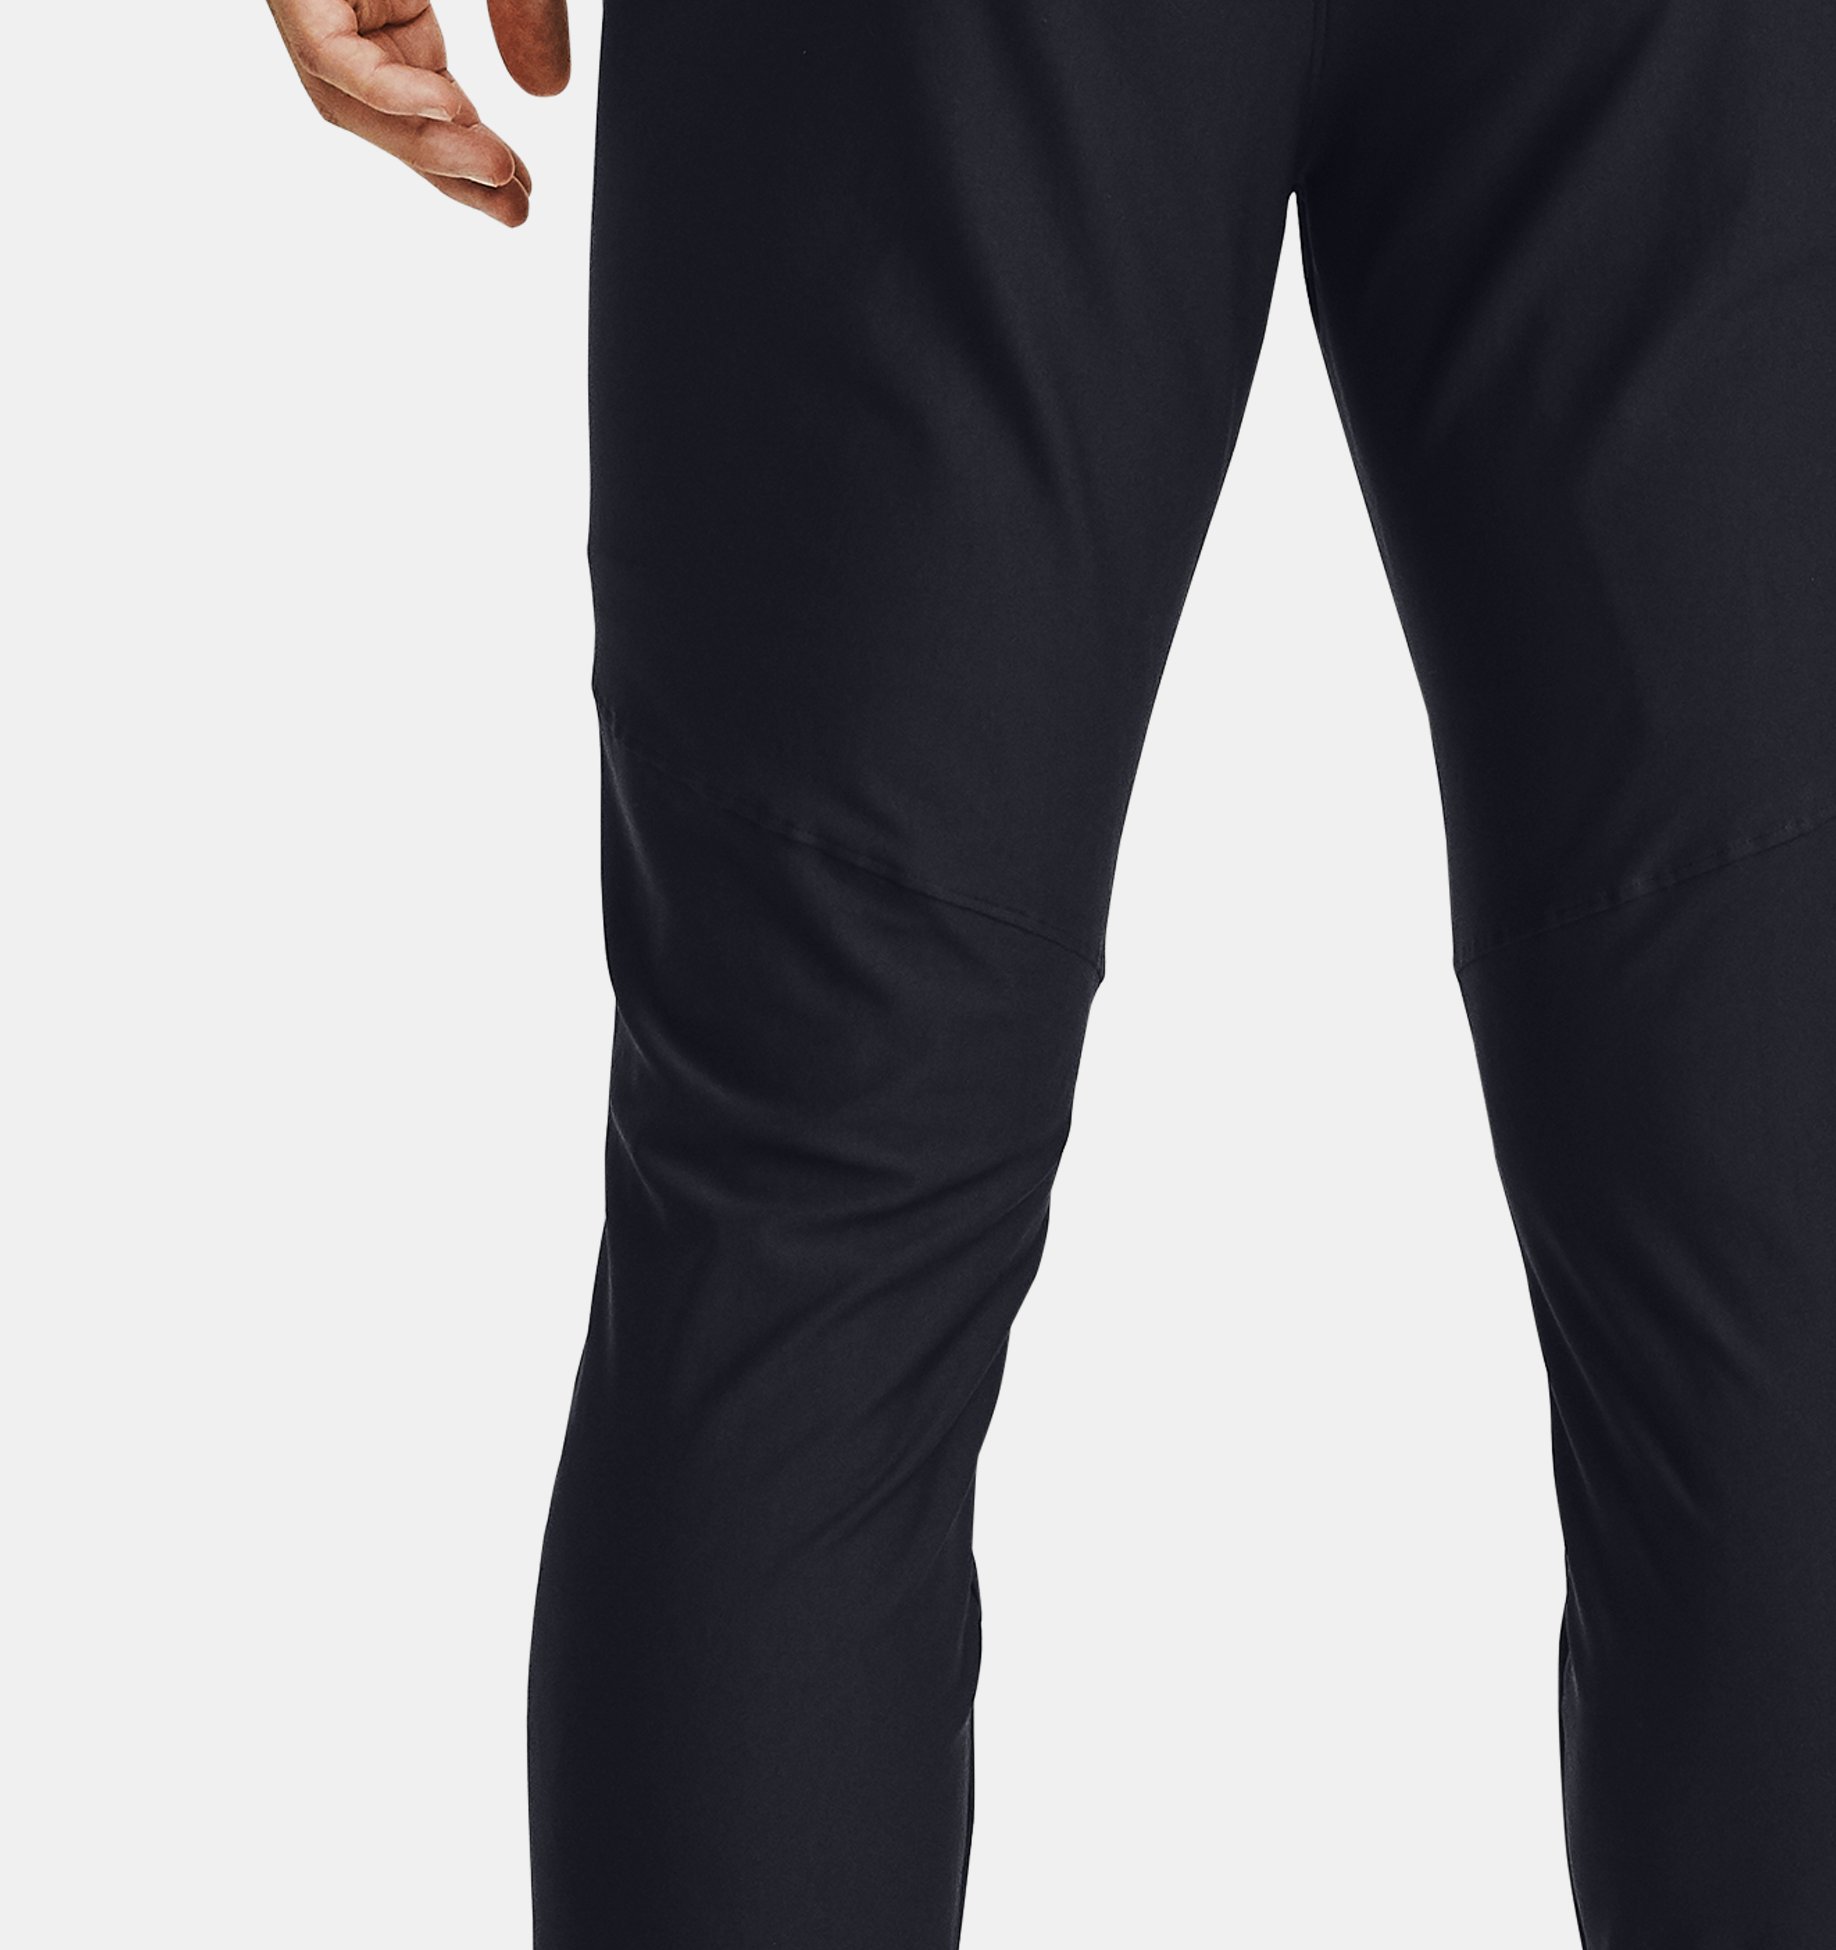 Under Armour Challenger III Training Pant Black